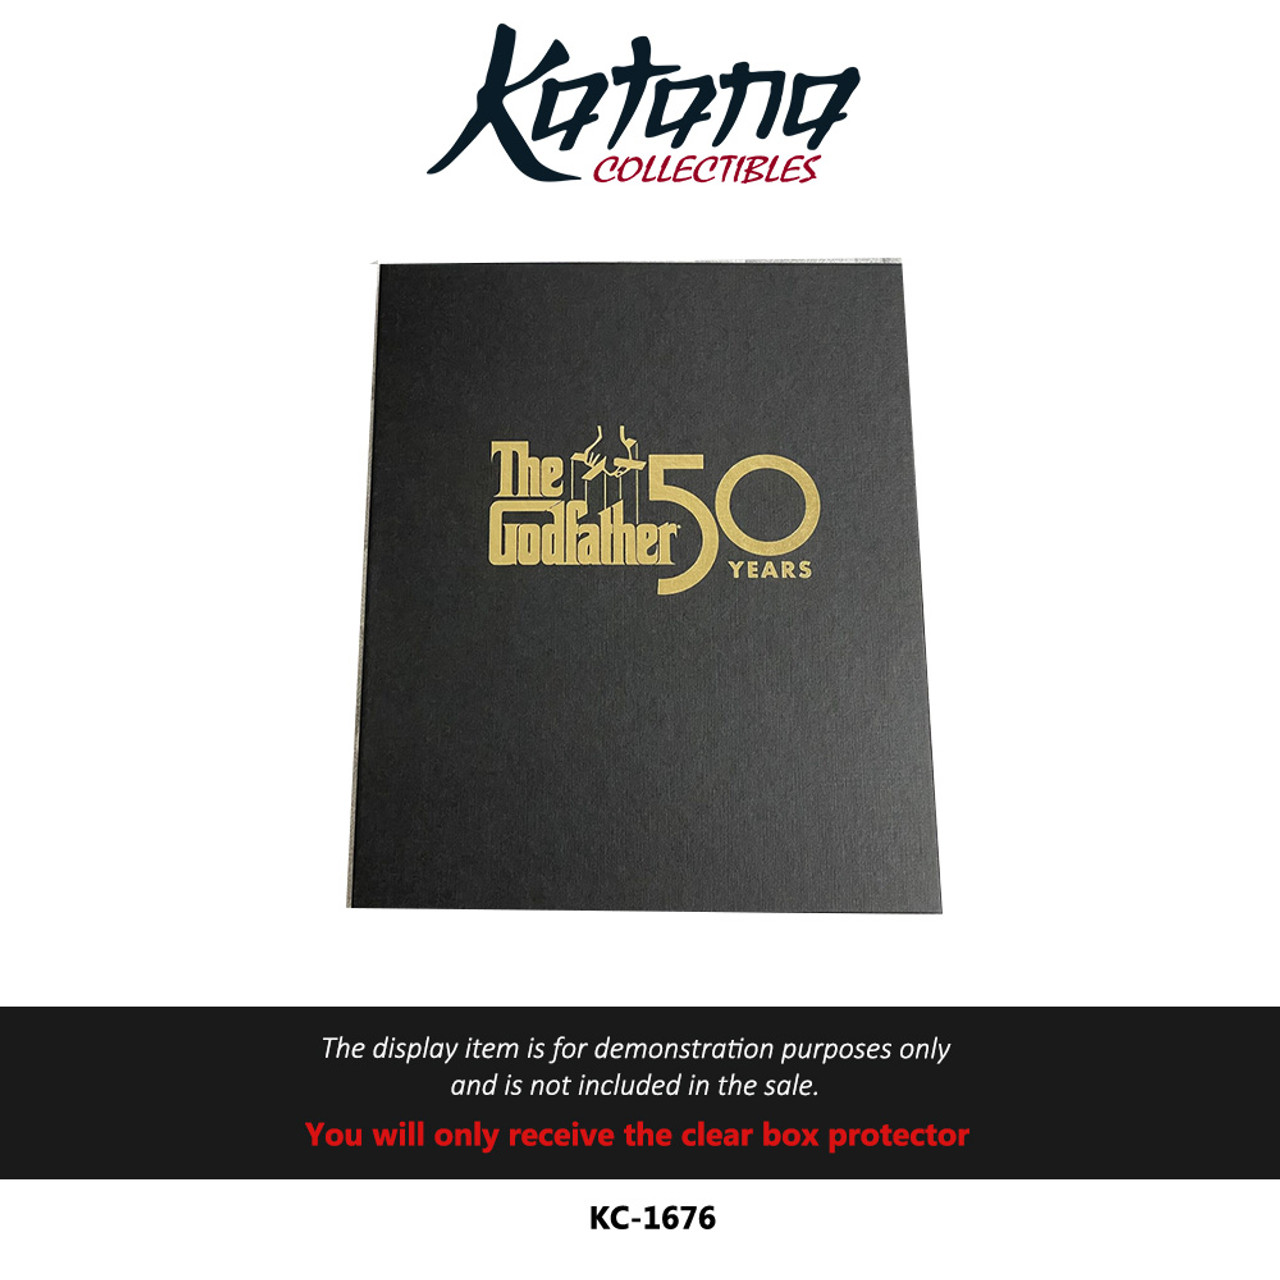 Katana Collectibles Protector For The Godfather - The 50th Anniversary Box Set